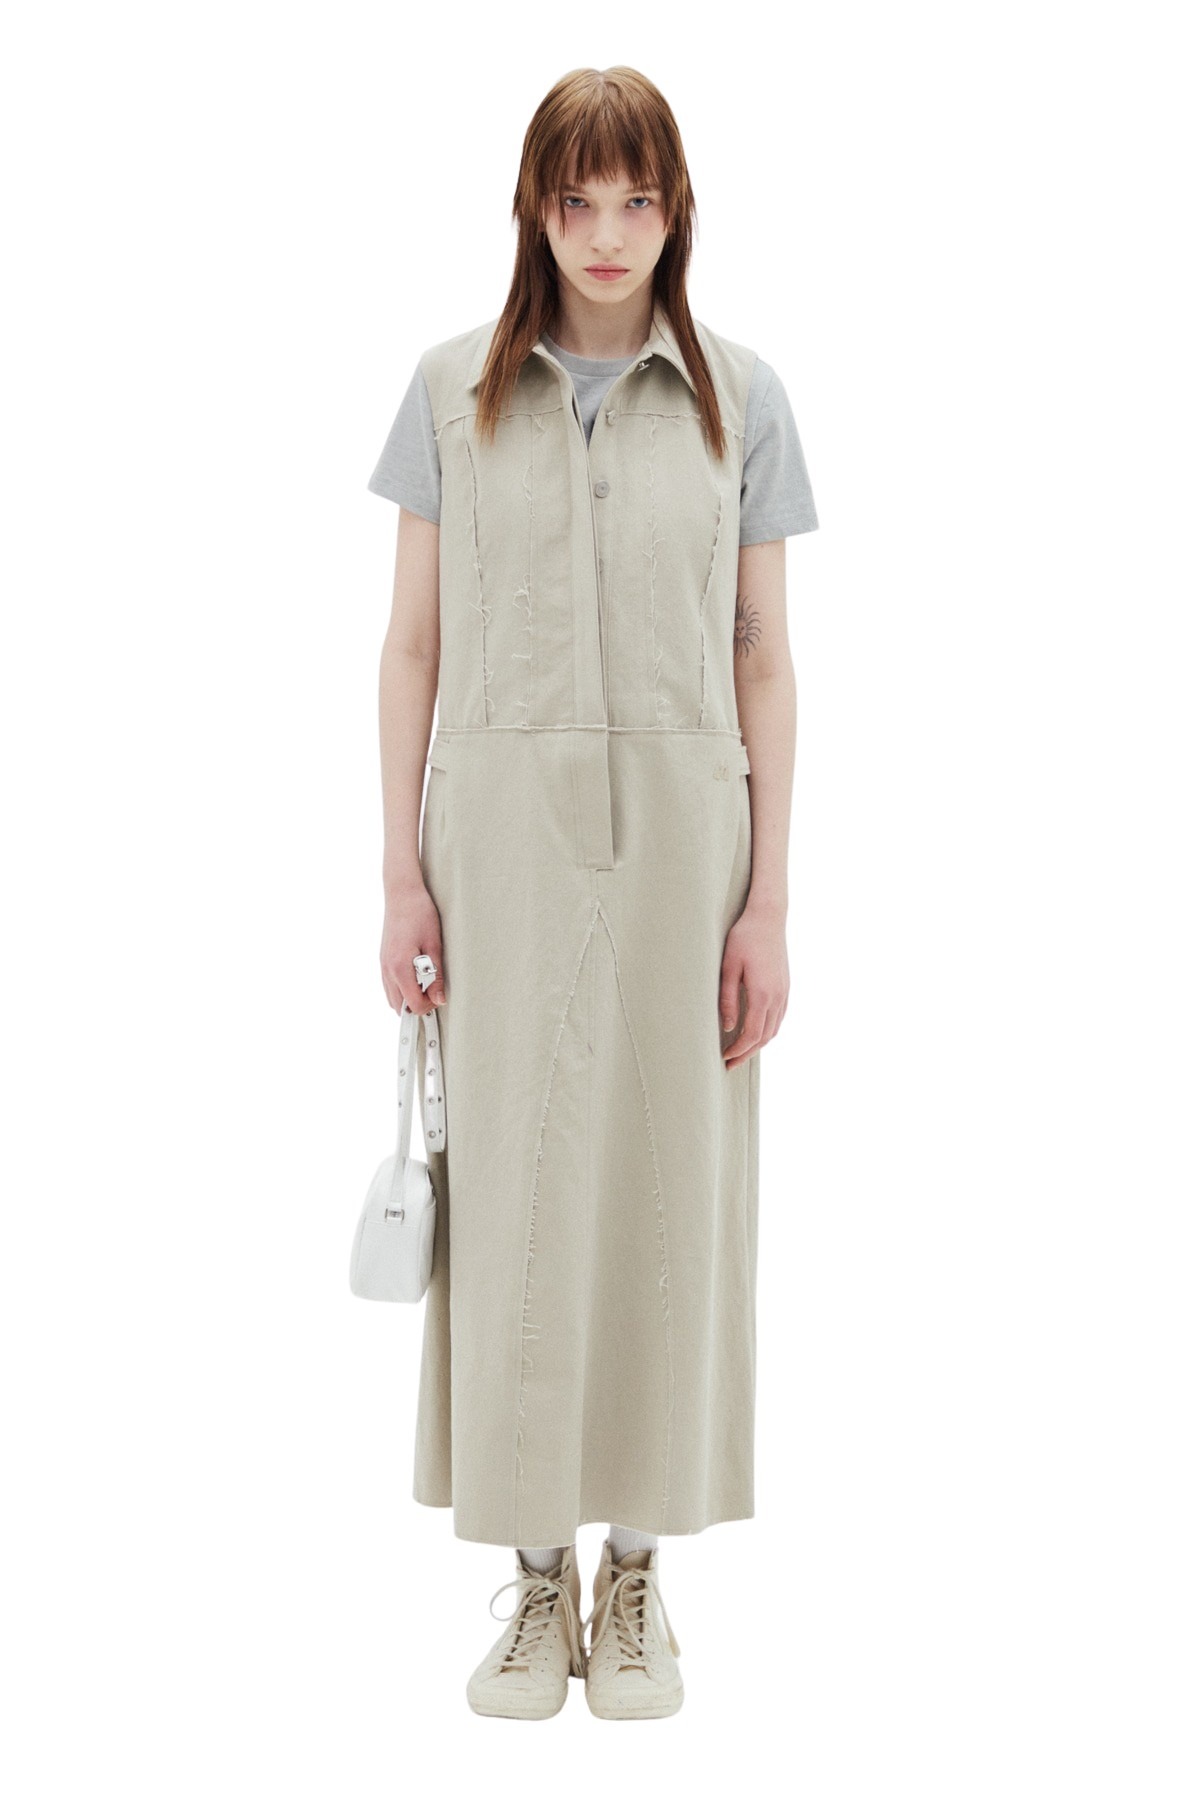 COTTON OVERALL LONG SKIRT IN BEIGE